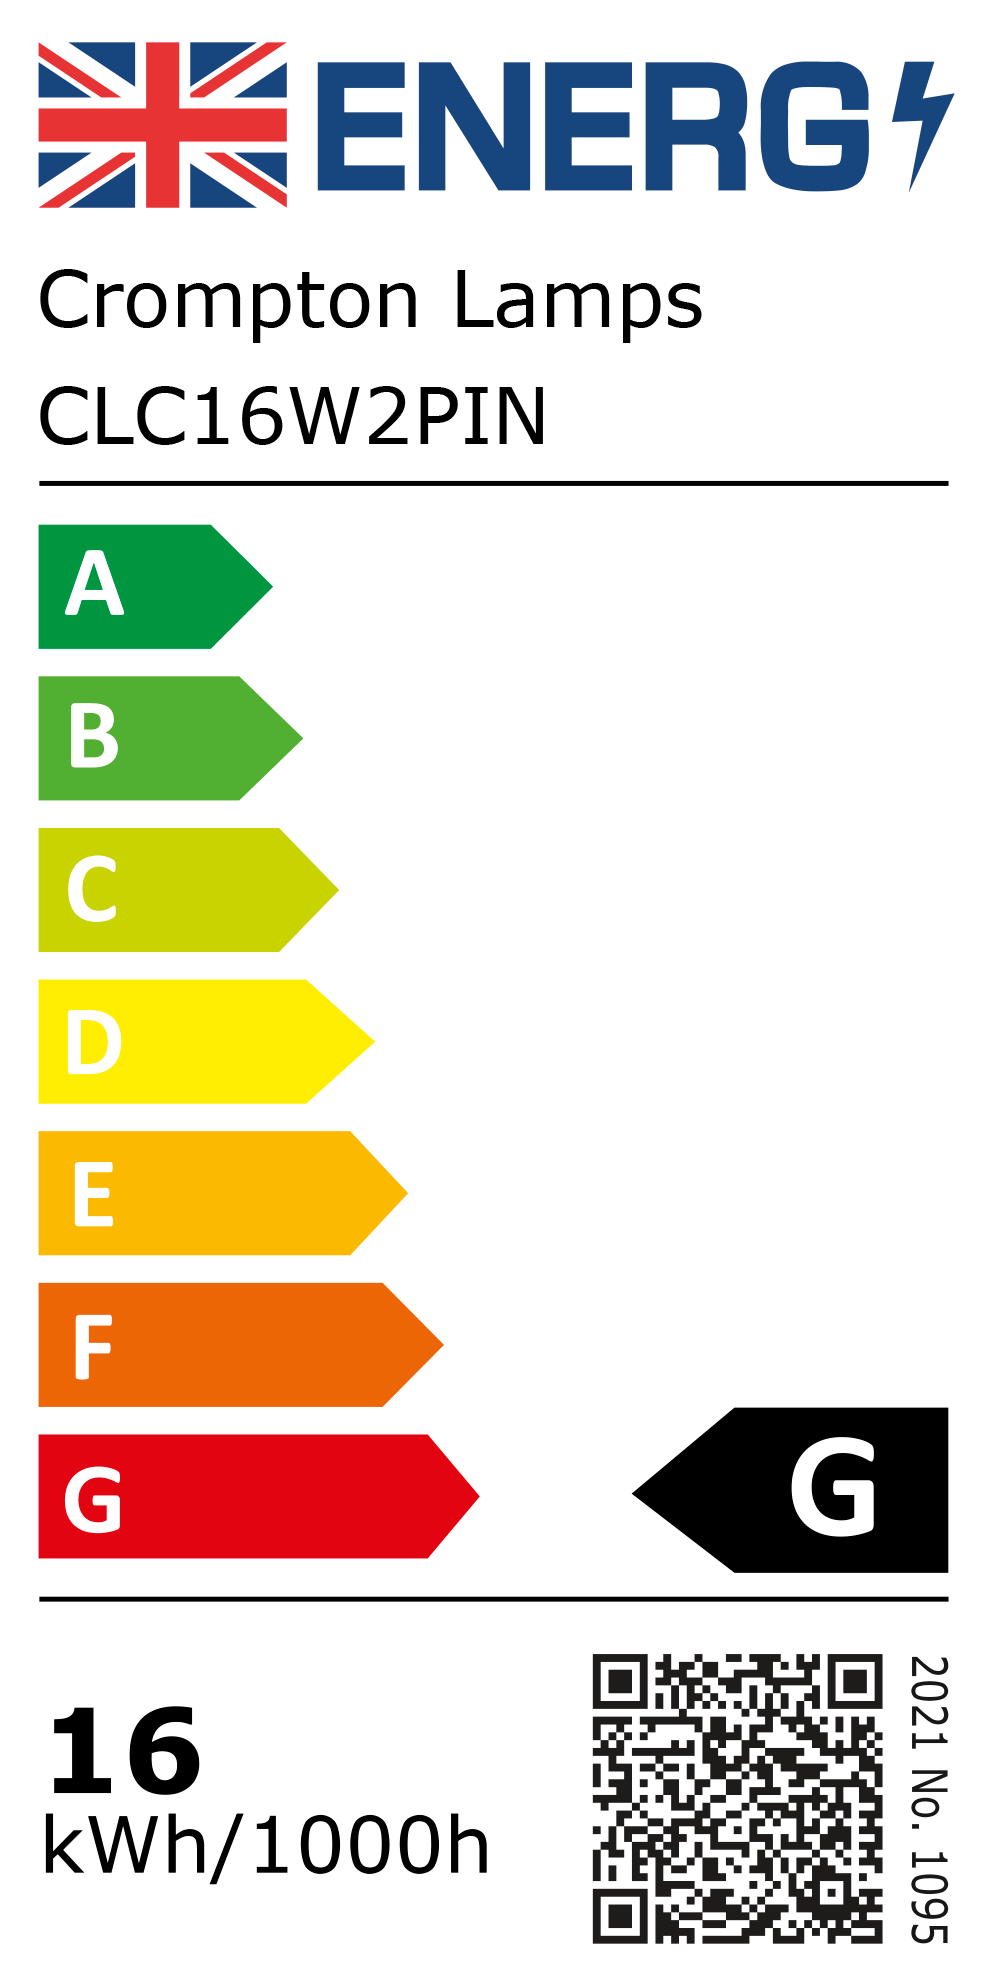 New 2021 Energy Rating Label: Stock Code CLC16W2PIN